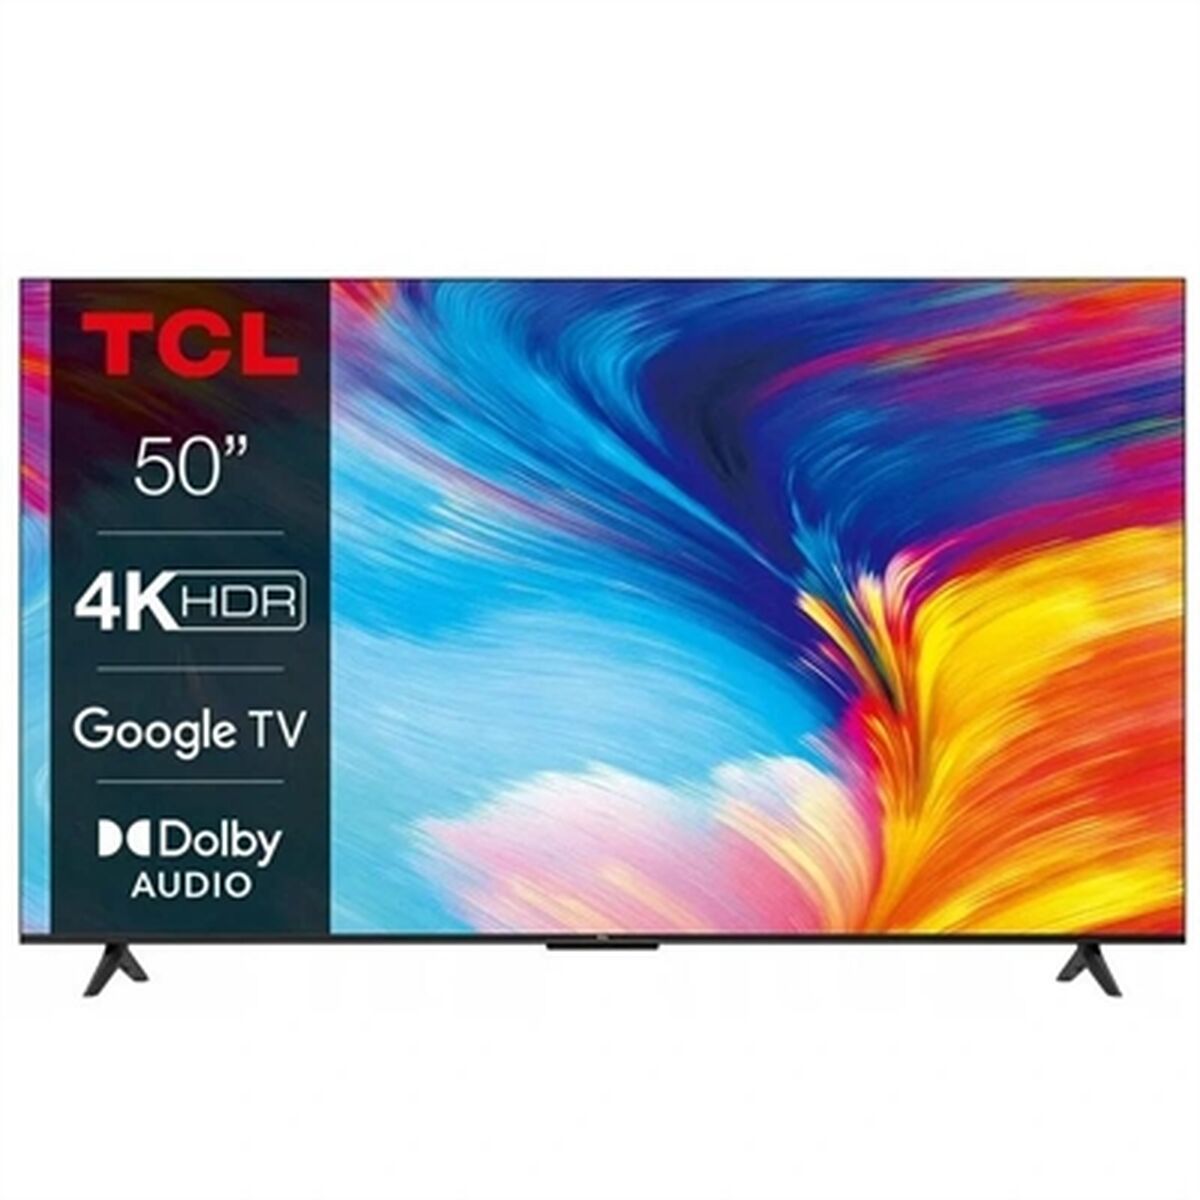 Primary image for Smart TV TCL 50P631 QLED 4K Ultra HD 50"